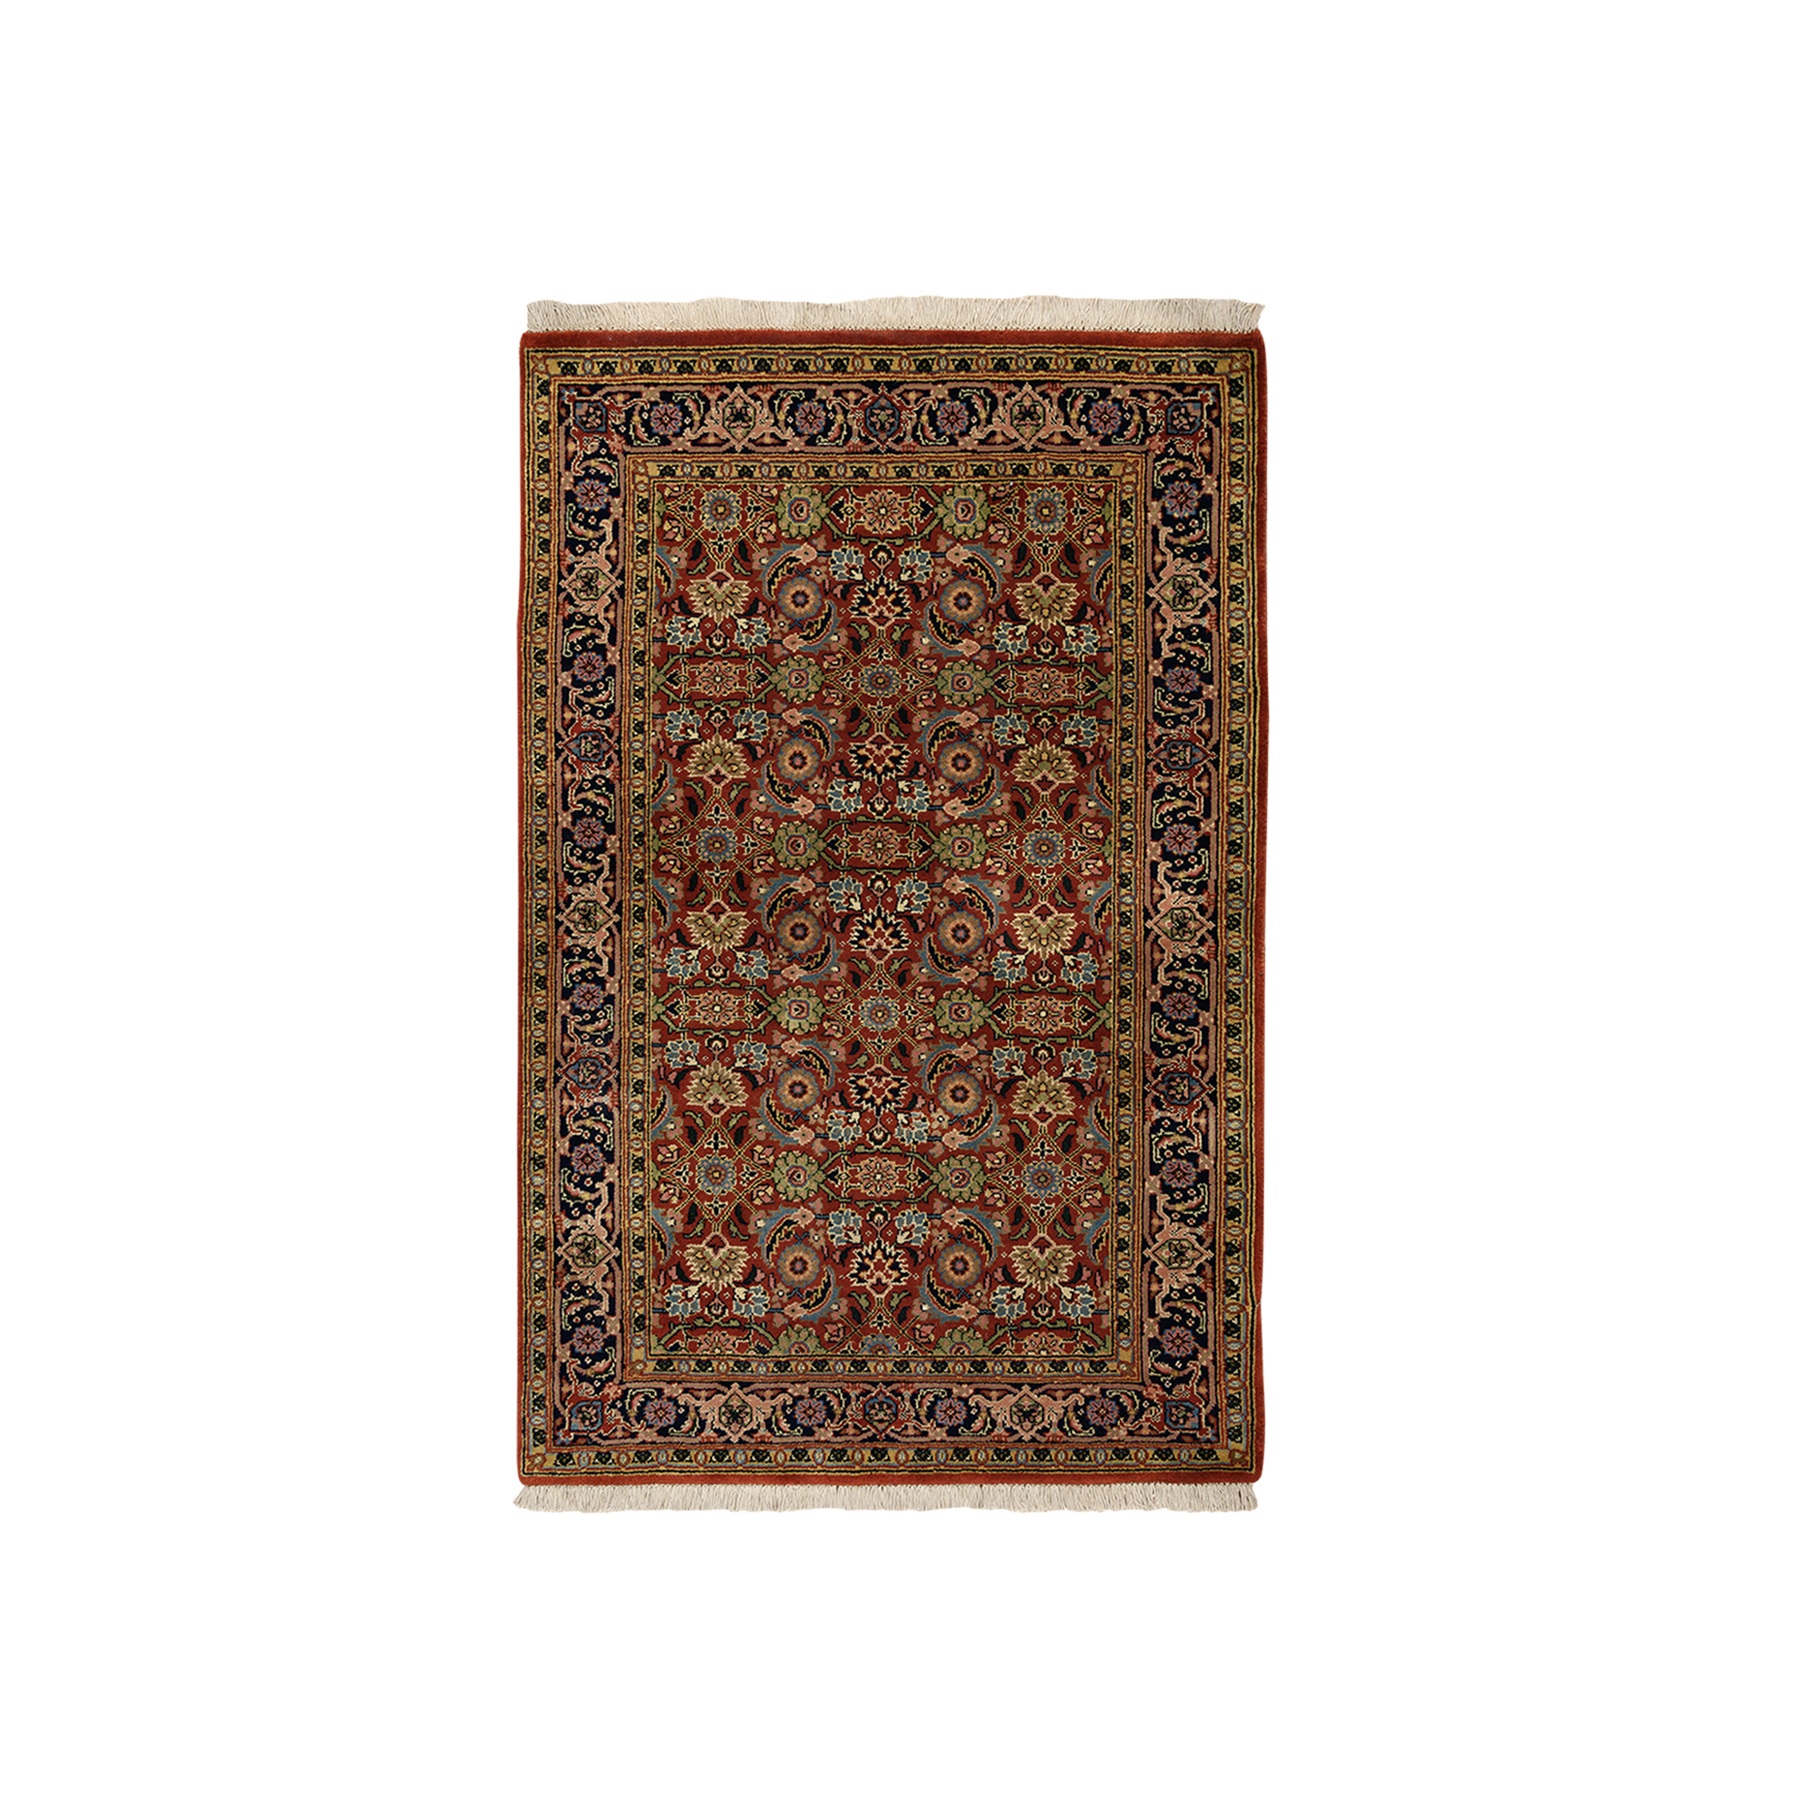 Pirniakan Collection Hand Knotted Red Rug No: 1126006